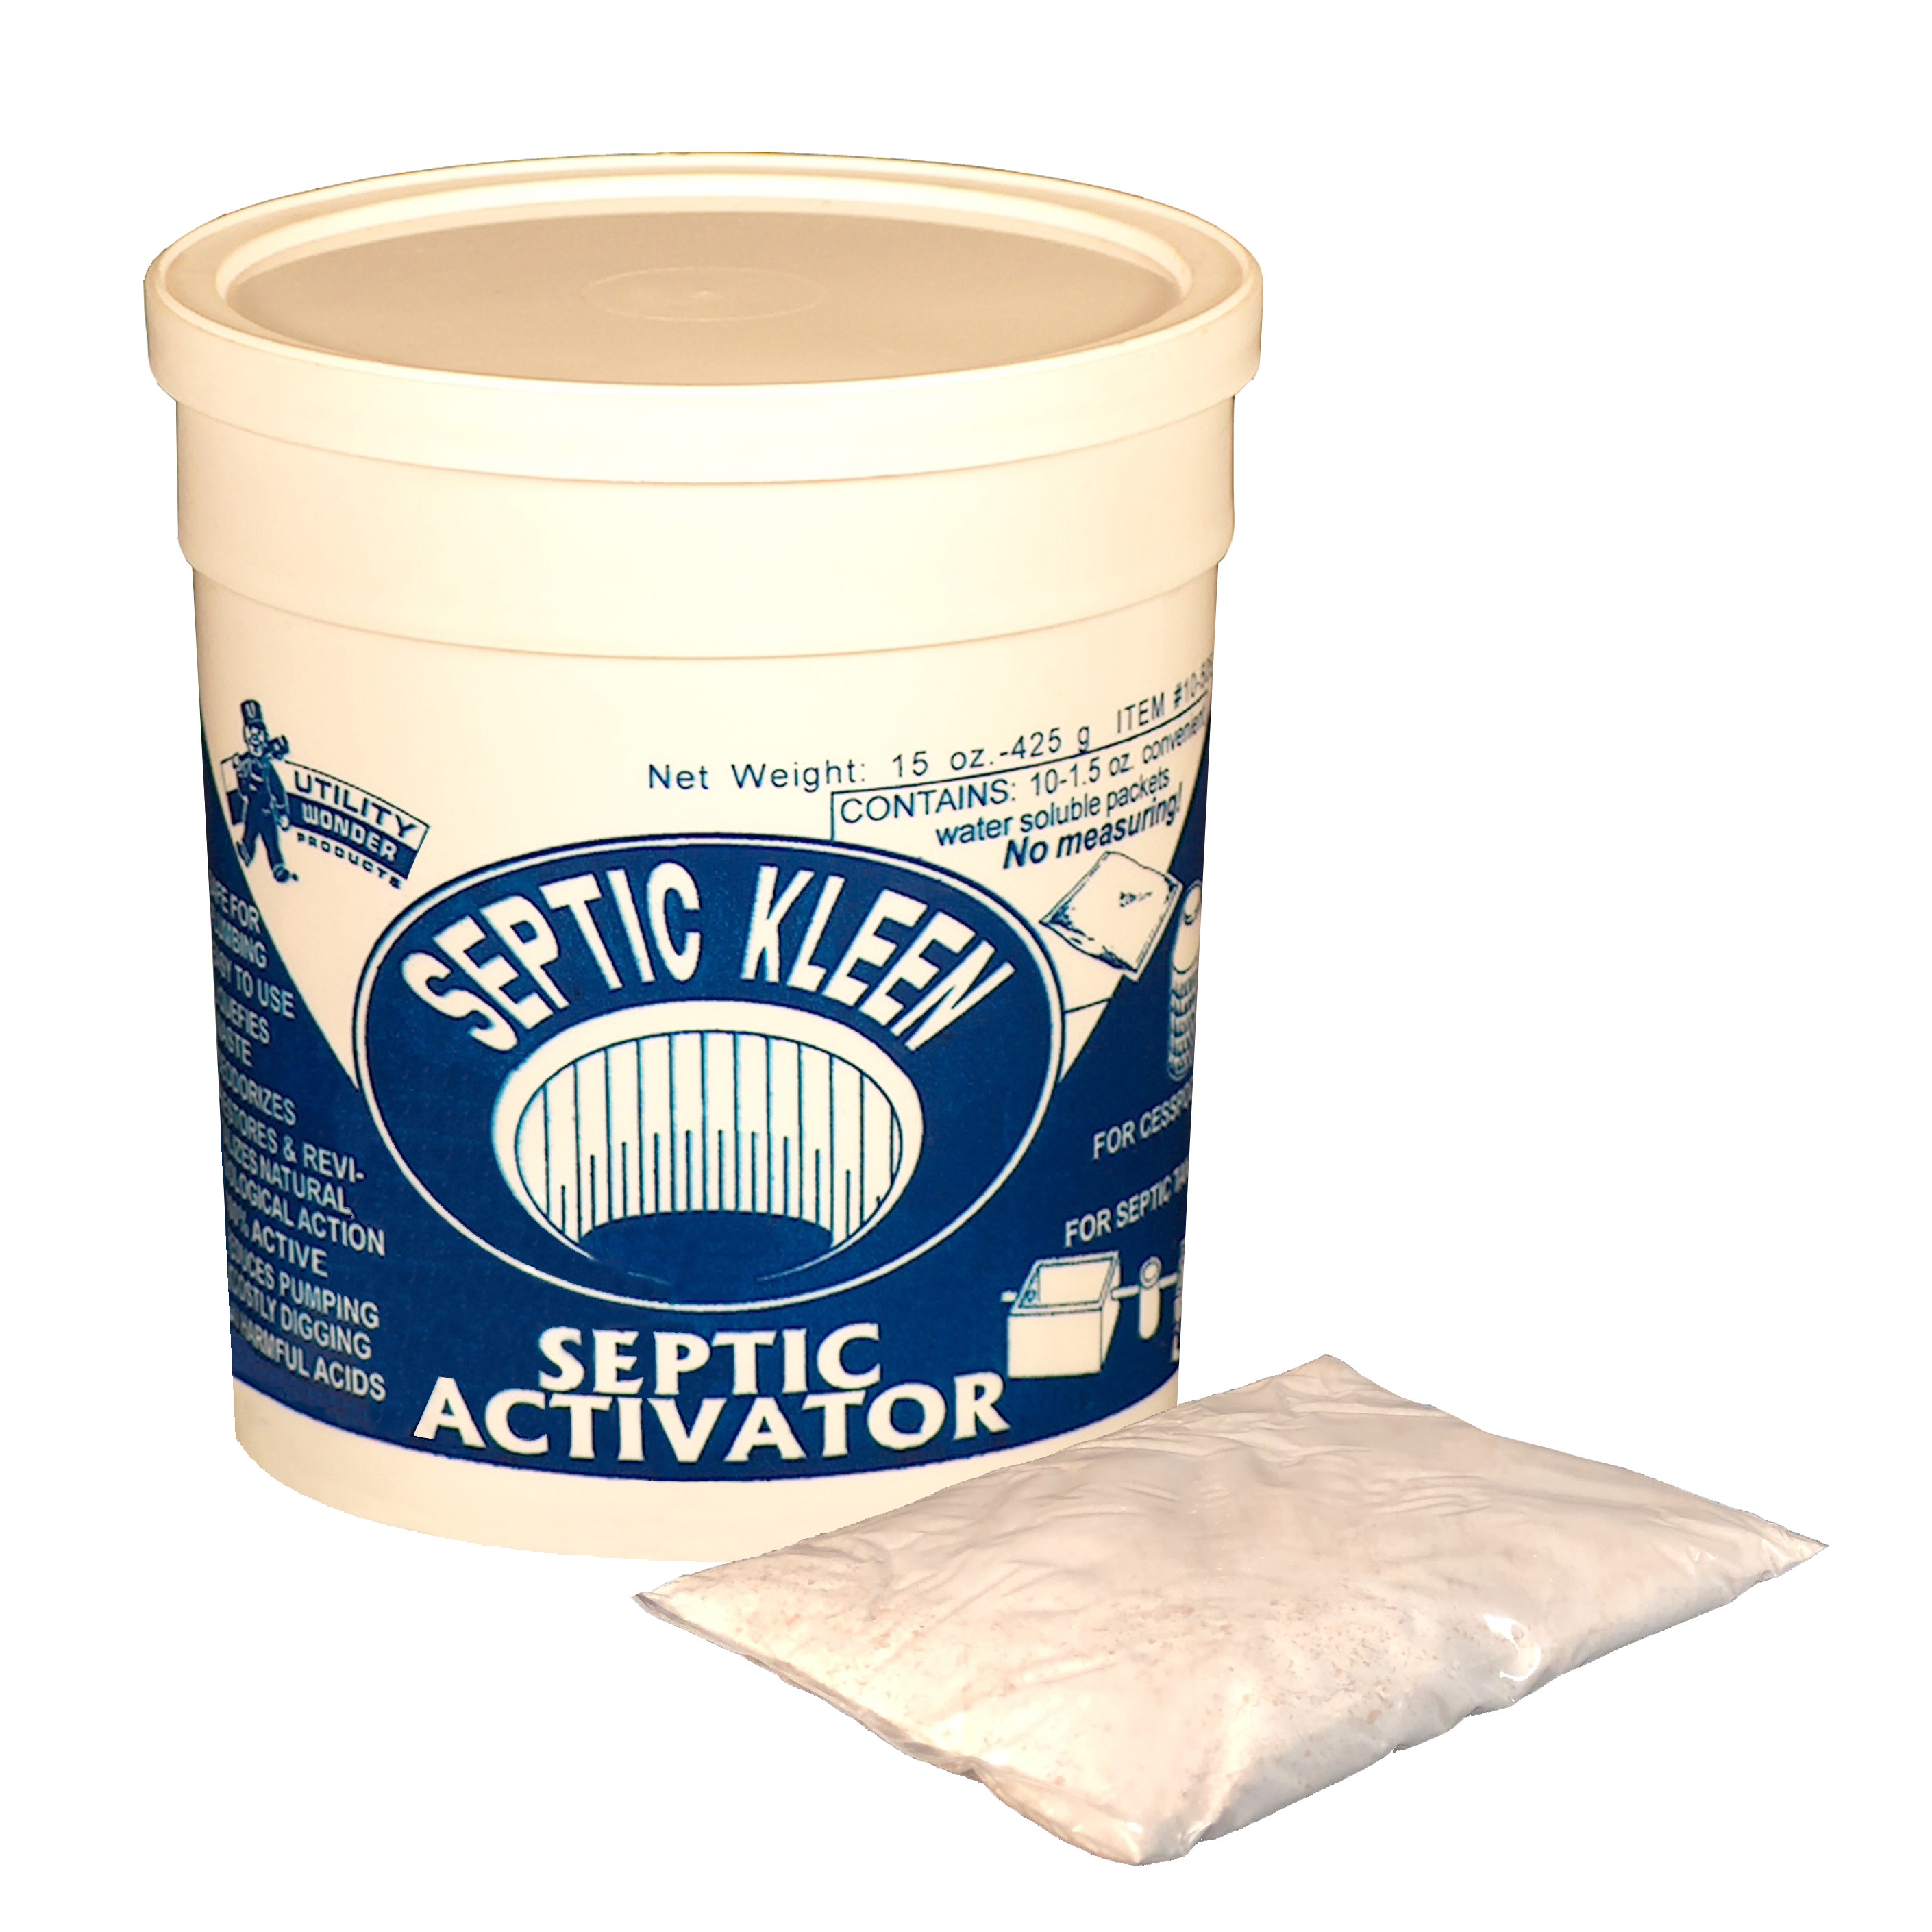 SEPTIC KLEEN SEPTIC ACTIVATOR